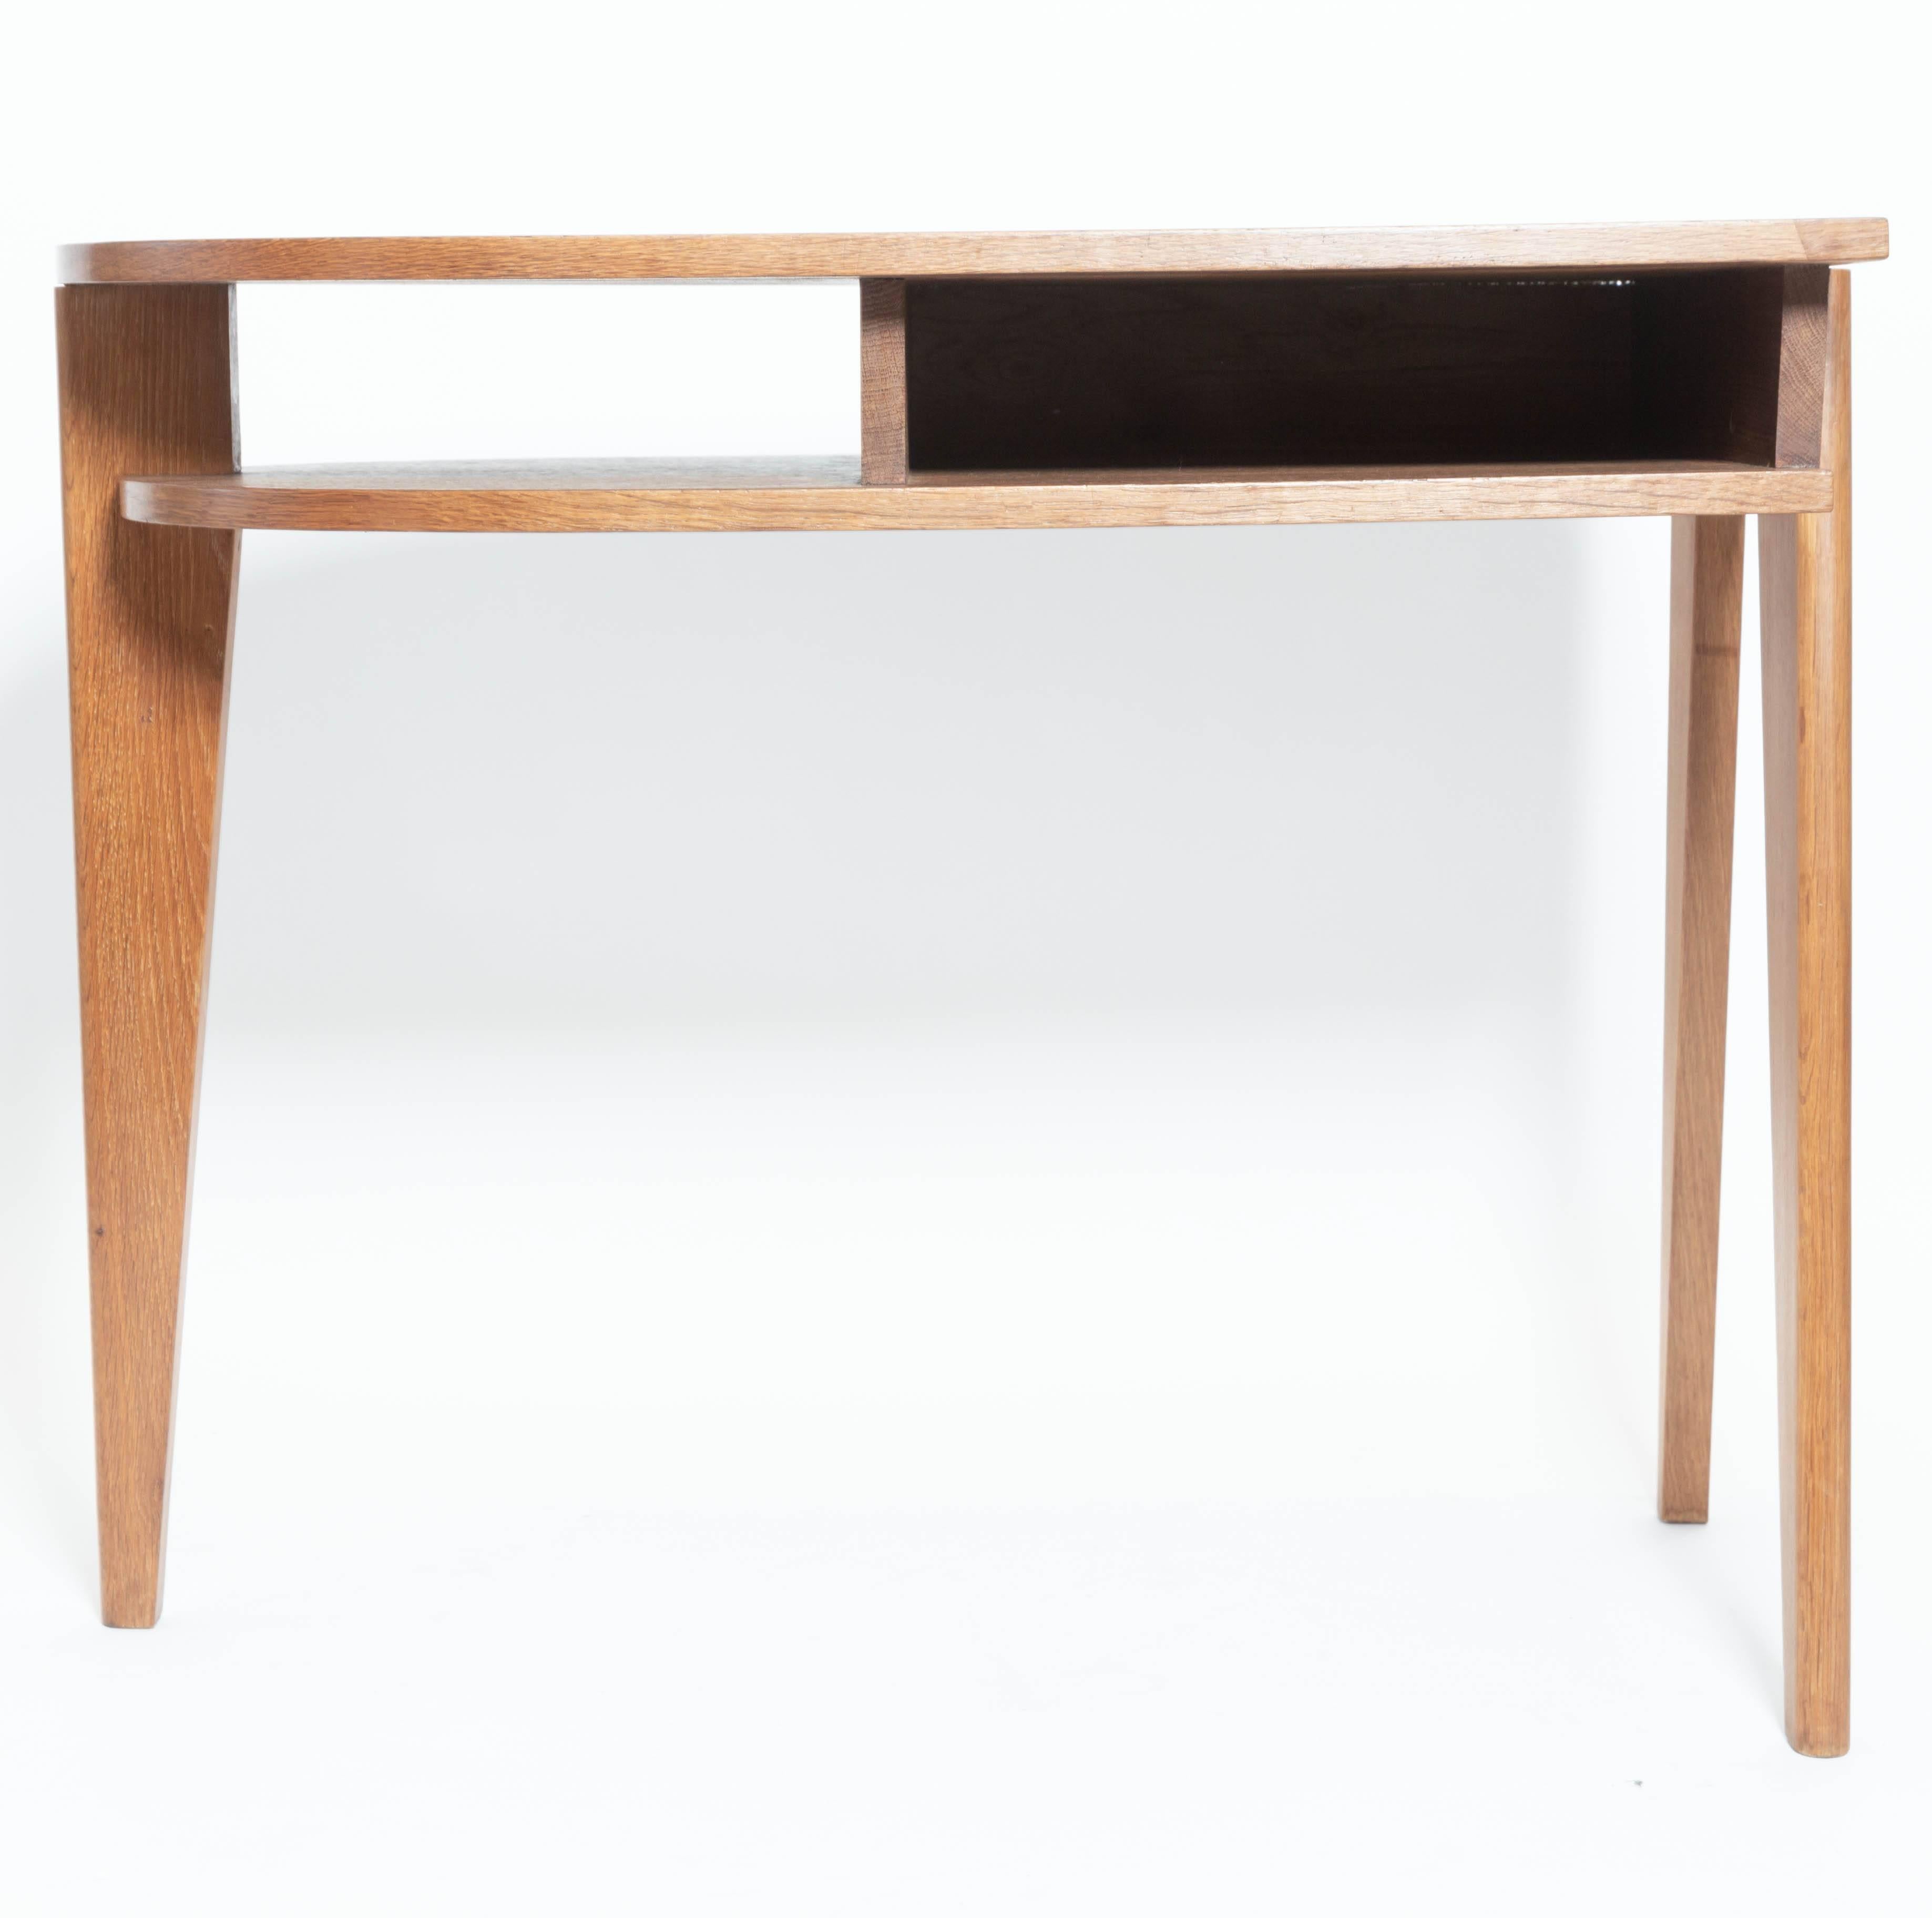 Mid-20th Century Oak Tripod Desk in the Manner of Jacques Adnet, France, c. 1950s